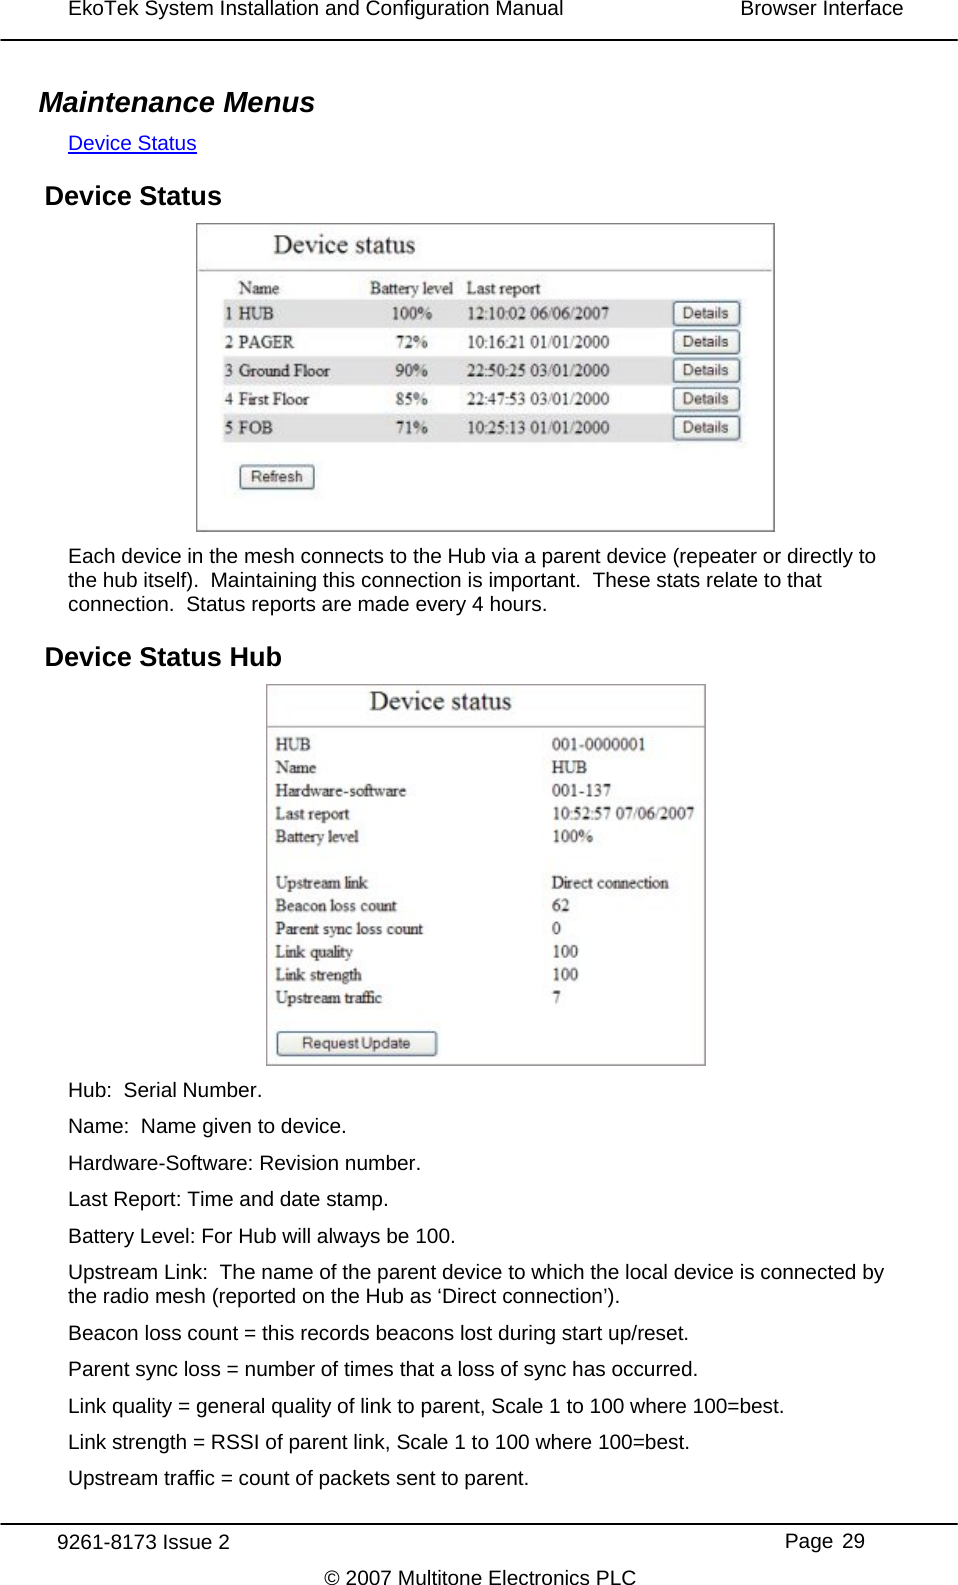 EkoTek System Installation and Configuration Manual  Browser Interface  Maintenance Menus Device StatusDevice Status  Each device in the mesh connects to the Hub via a parent device (repeater or directly to the hub itself).  Maintaining this connection is important.  These stats relate to that connection.  Status reports are made every 4 hours. Device Status Hub  Hub:  Serial Number. Name:  Name given to device. Hardware-Software: Revision number. Last Report: Time and date stamp. Battery Level: For Hub will always be 100. Upstream Link:  The name of the parent device to which the local device is connected by the radio mesh (reported on the Hub as ‘Direct connection’). Beacon loss count = this records beacons lost during start up/reset. Parent sync loss = number of times that a loss of sync has occurred. Link quality = general quality of link to parent, Scale 1 to 100 where 100=best. Link strength = RSSI of parent link, Scale 1 to 100 where 100=best. Upstream traffic = count of packets sent to parent.  9261-8173 Issue 2     Page 29 © 2007 Multitone Electronics PLC 